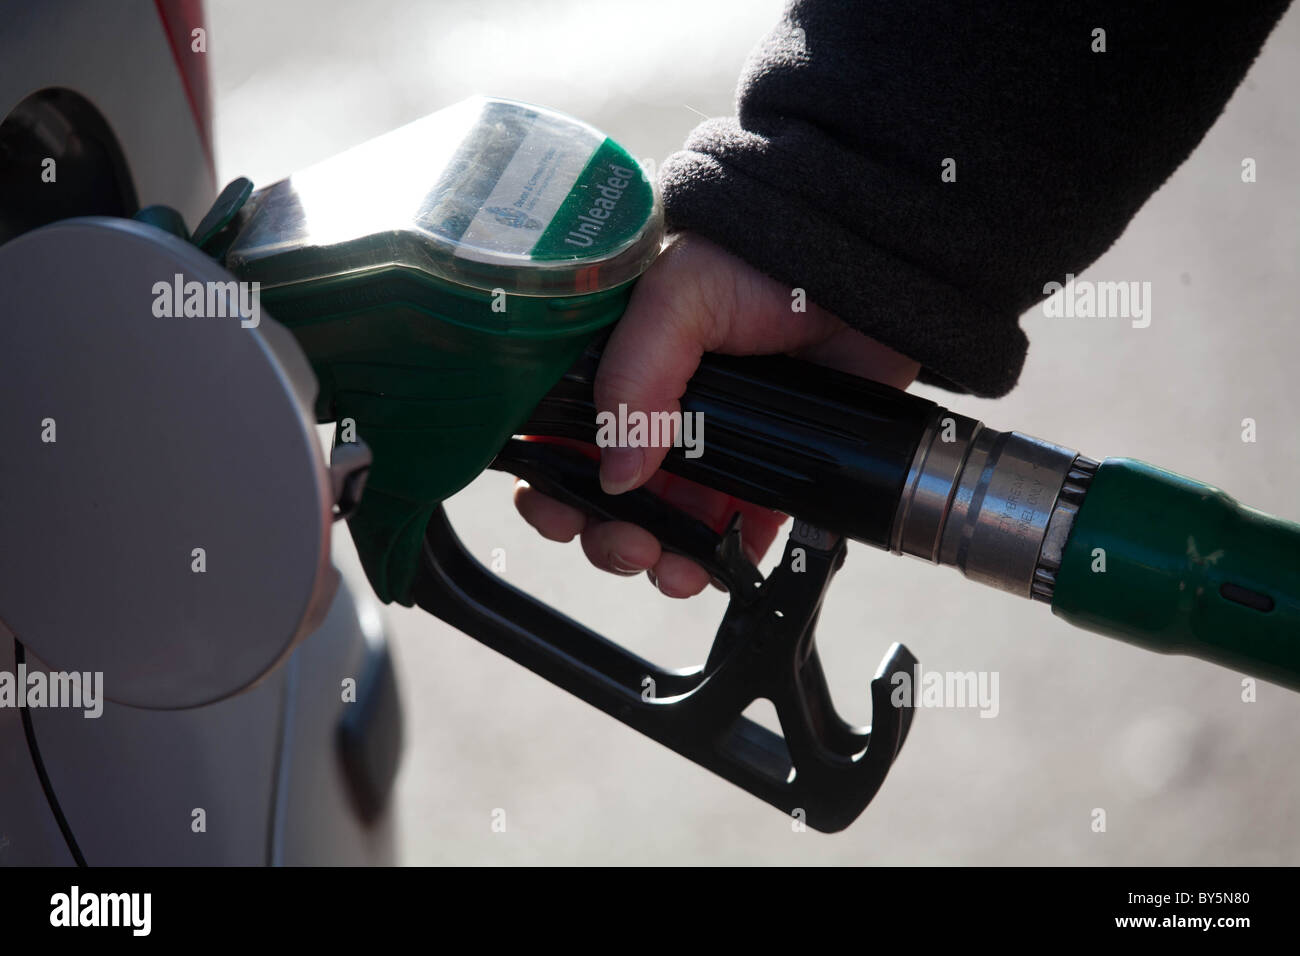 Petrol fuel silver car unleaded womans hand Stock Photo